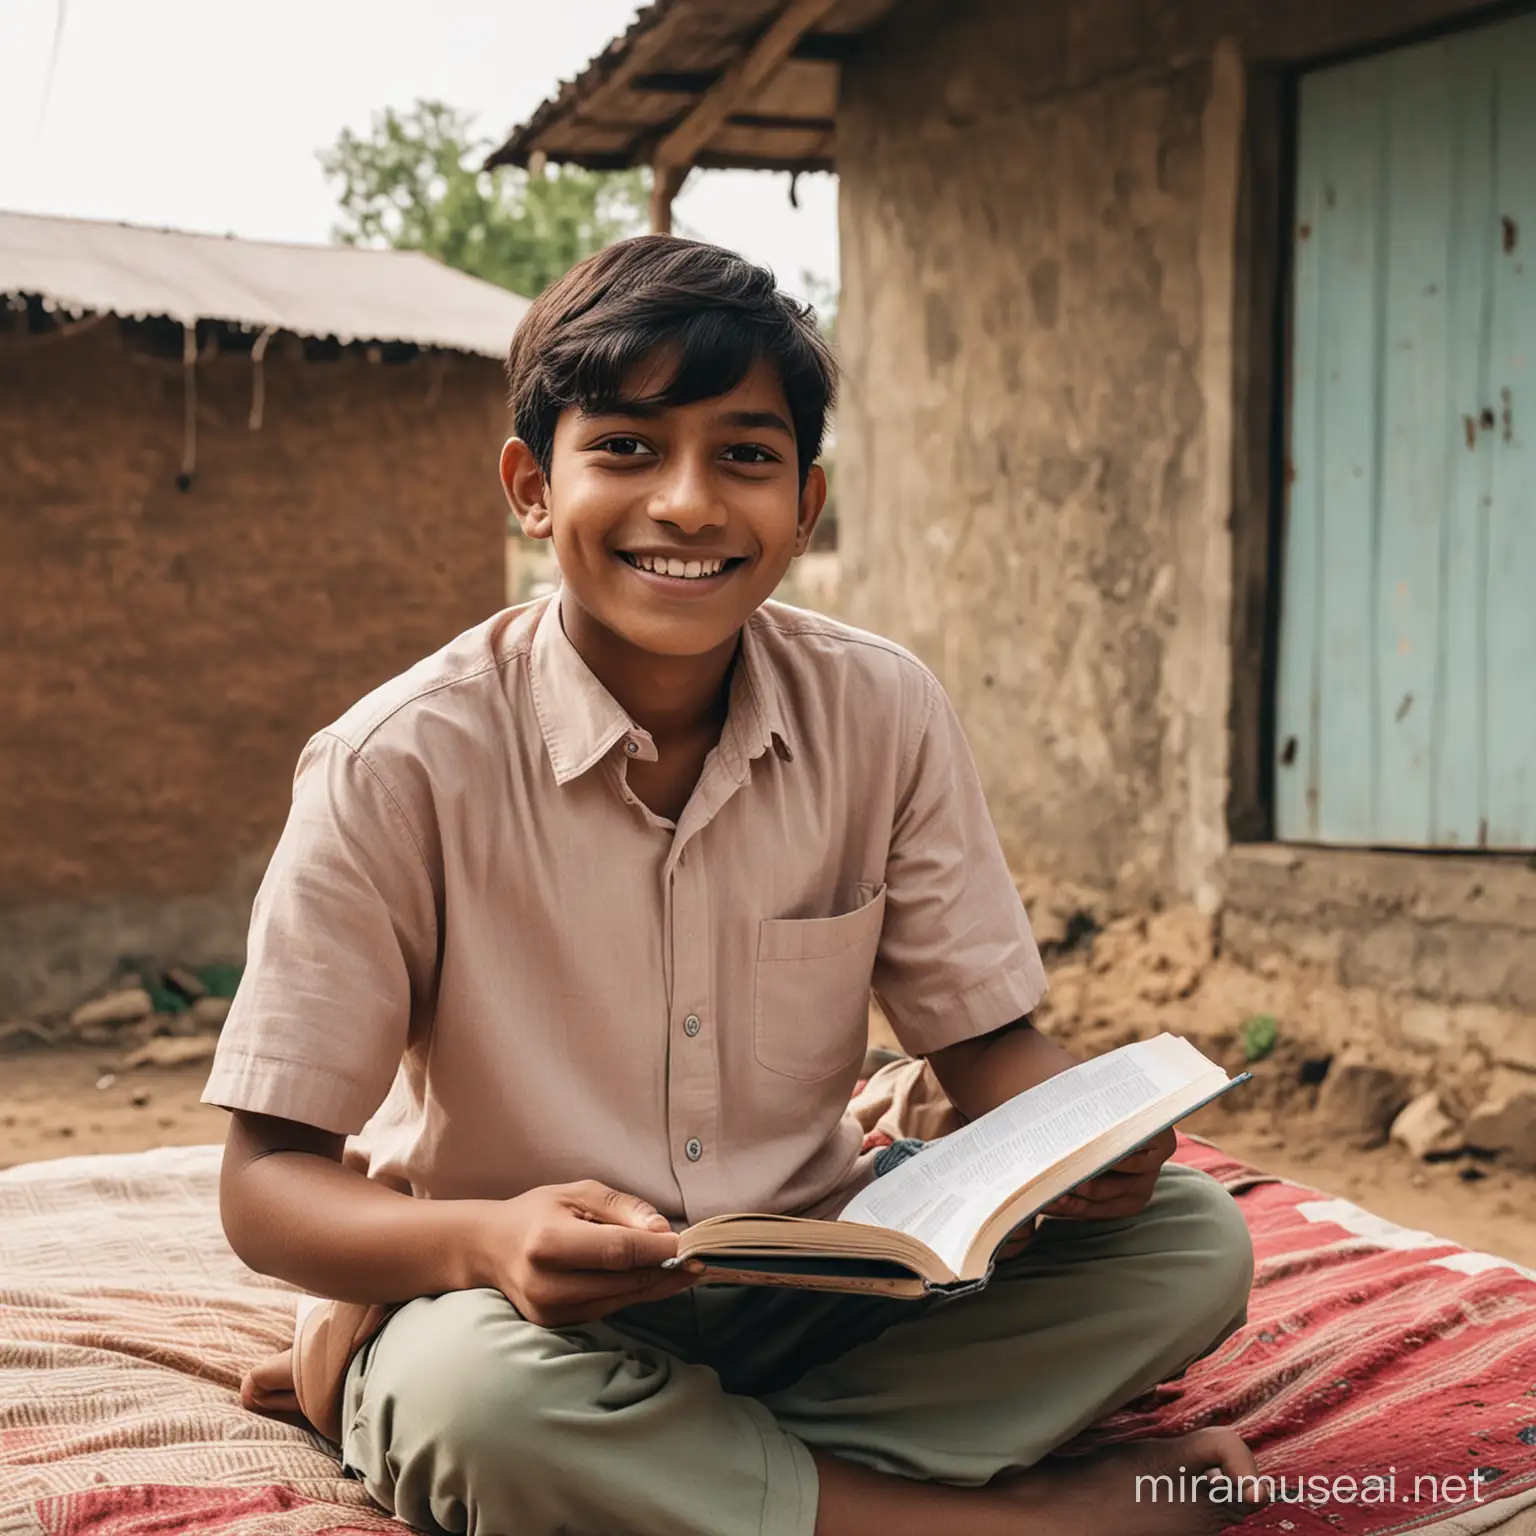 Smiling Indian Boy Reading Book Outside His Rural Home